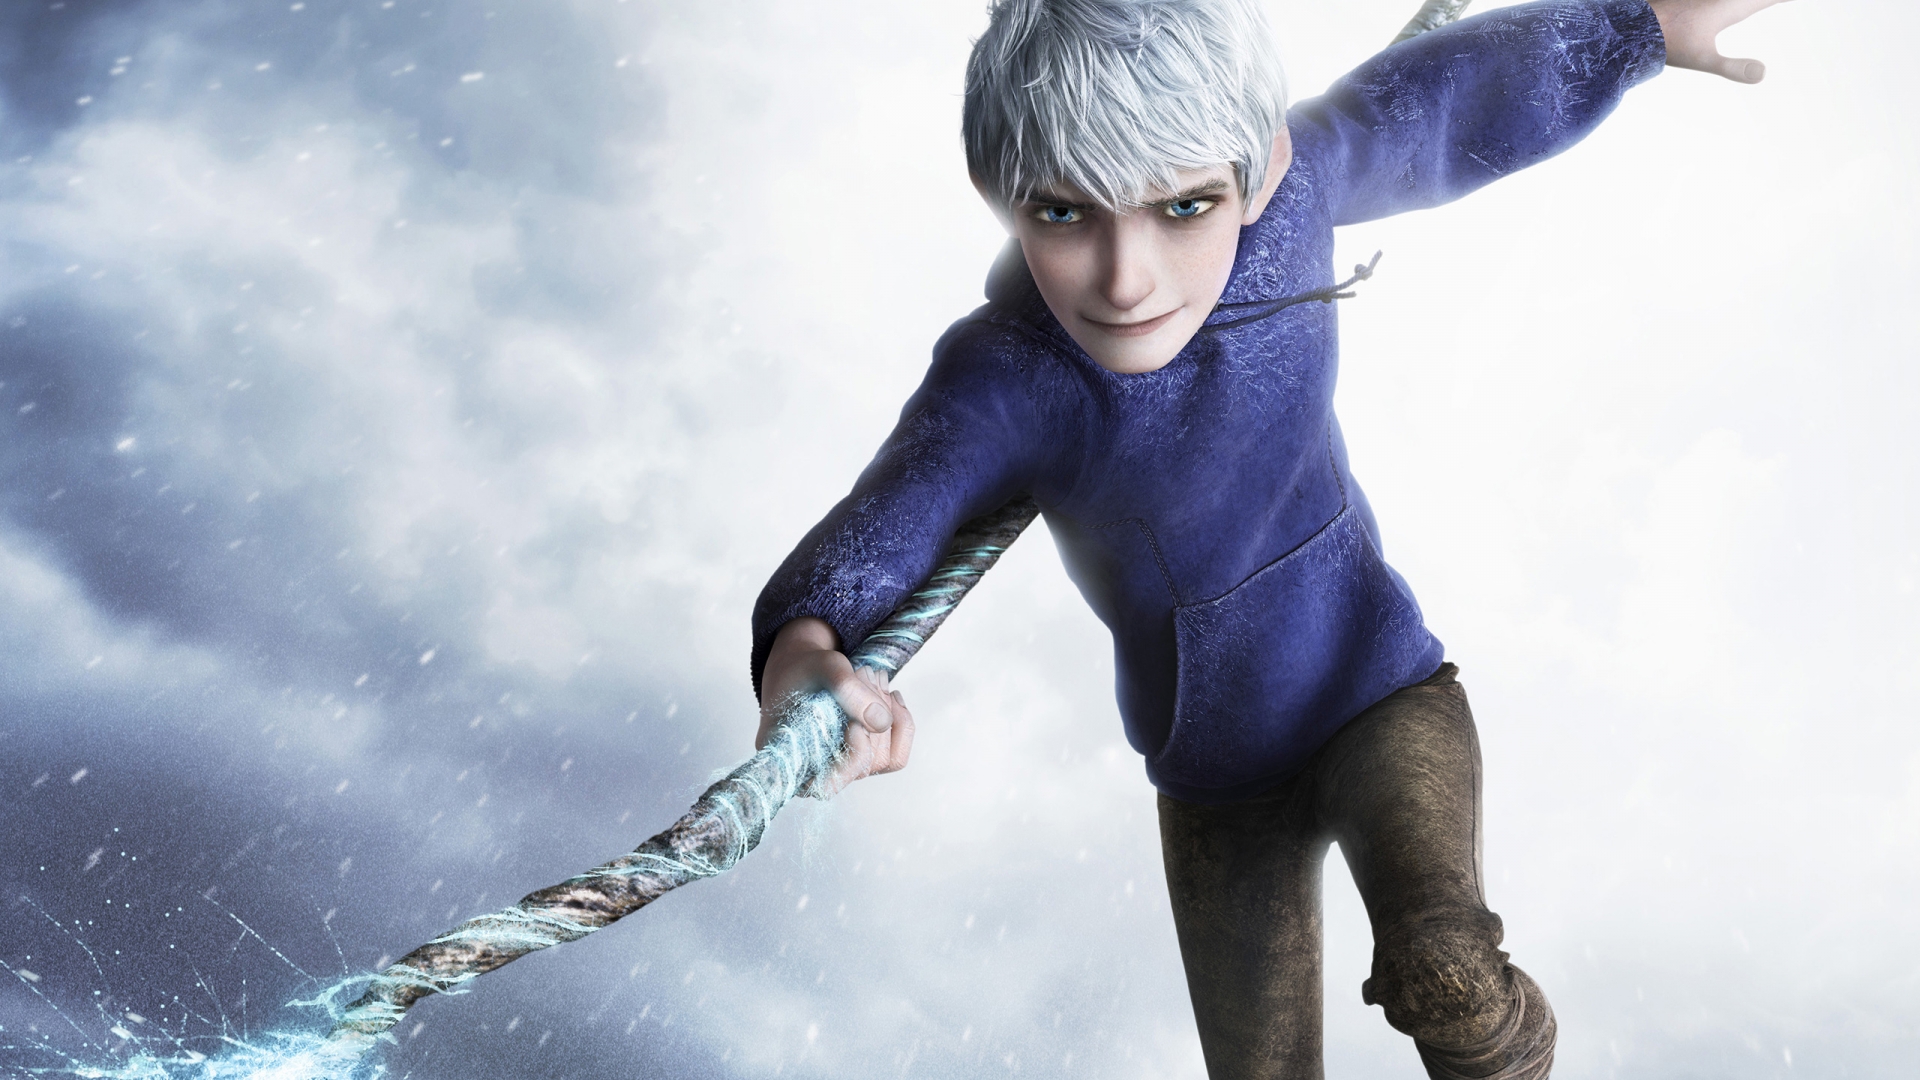 Jack Frost Rise of the guardians 1920x1080 - hebus.org - High resolution